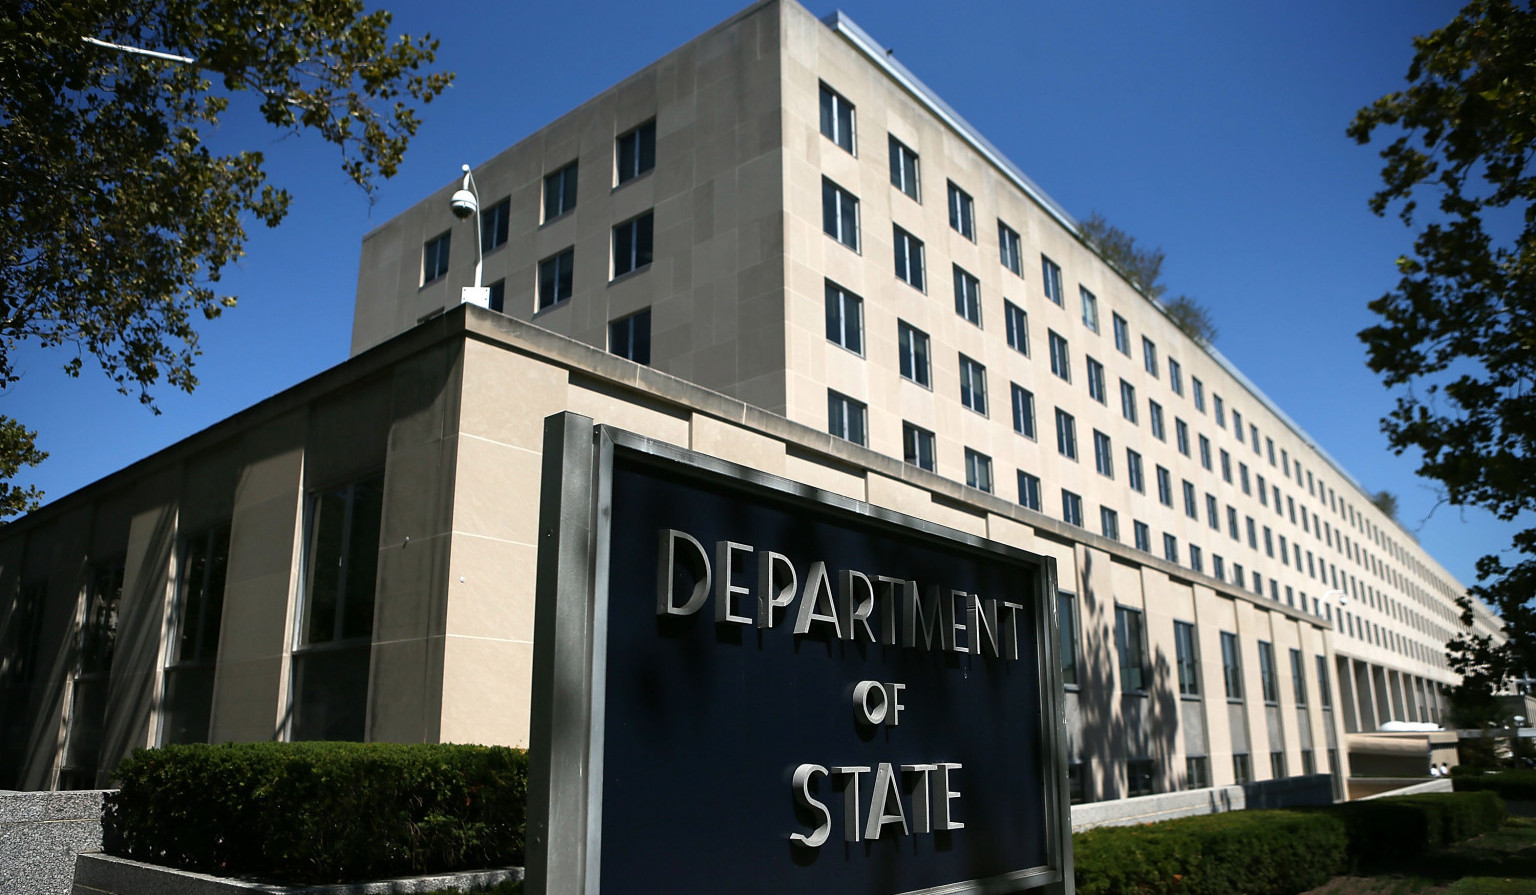 US welcomes progress of EU observation mission in region: State Department